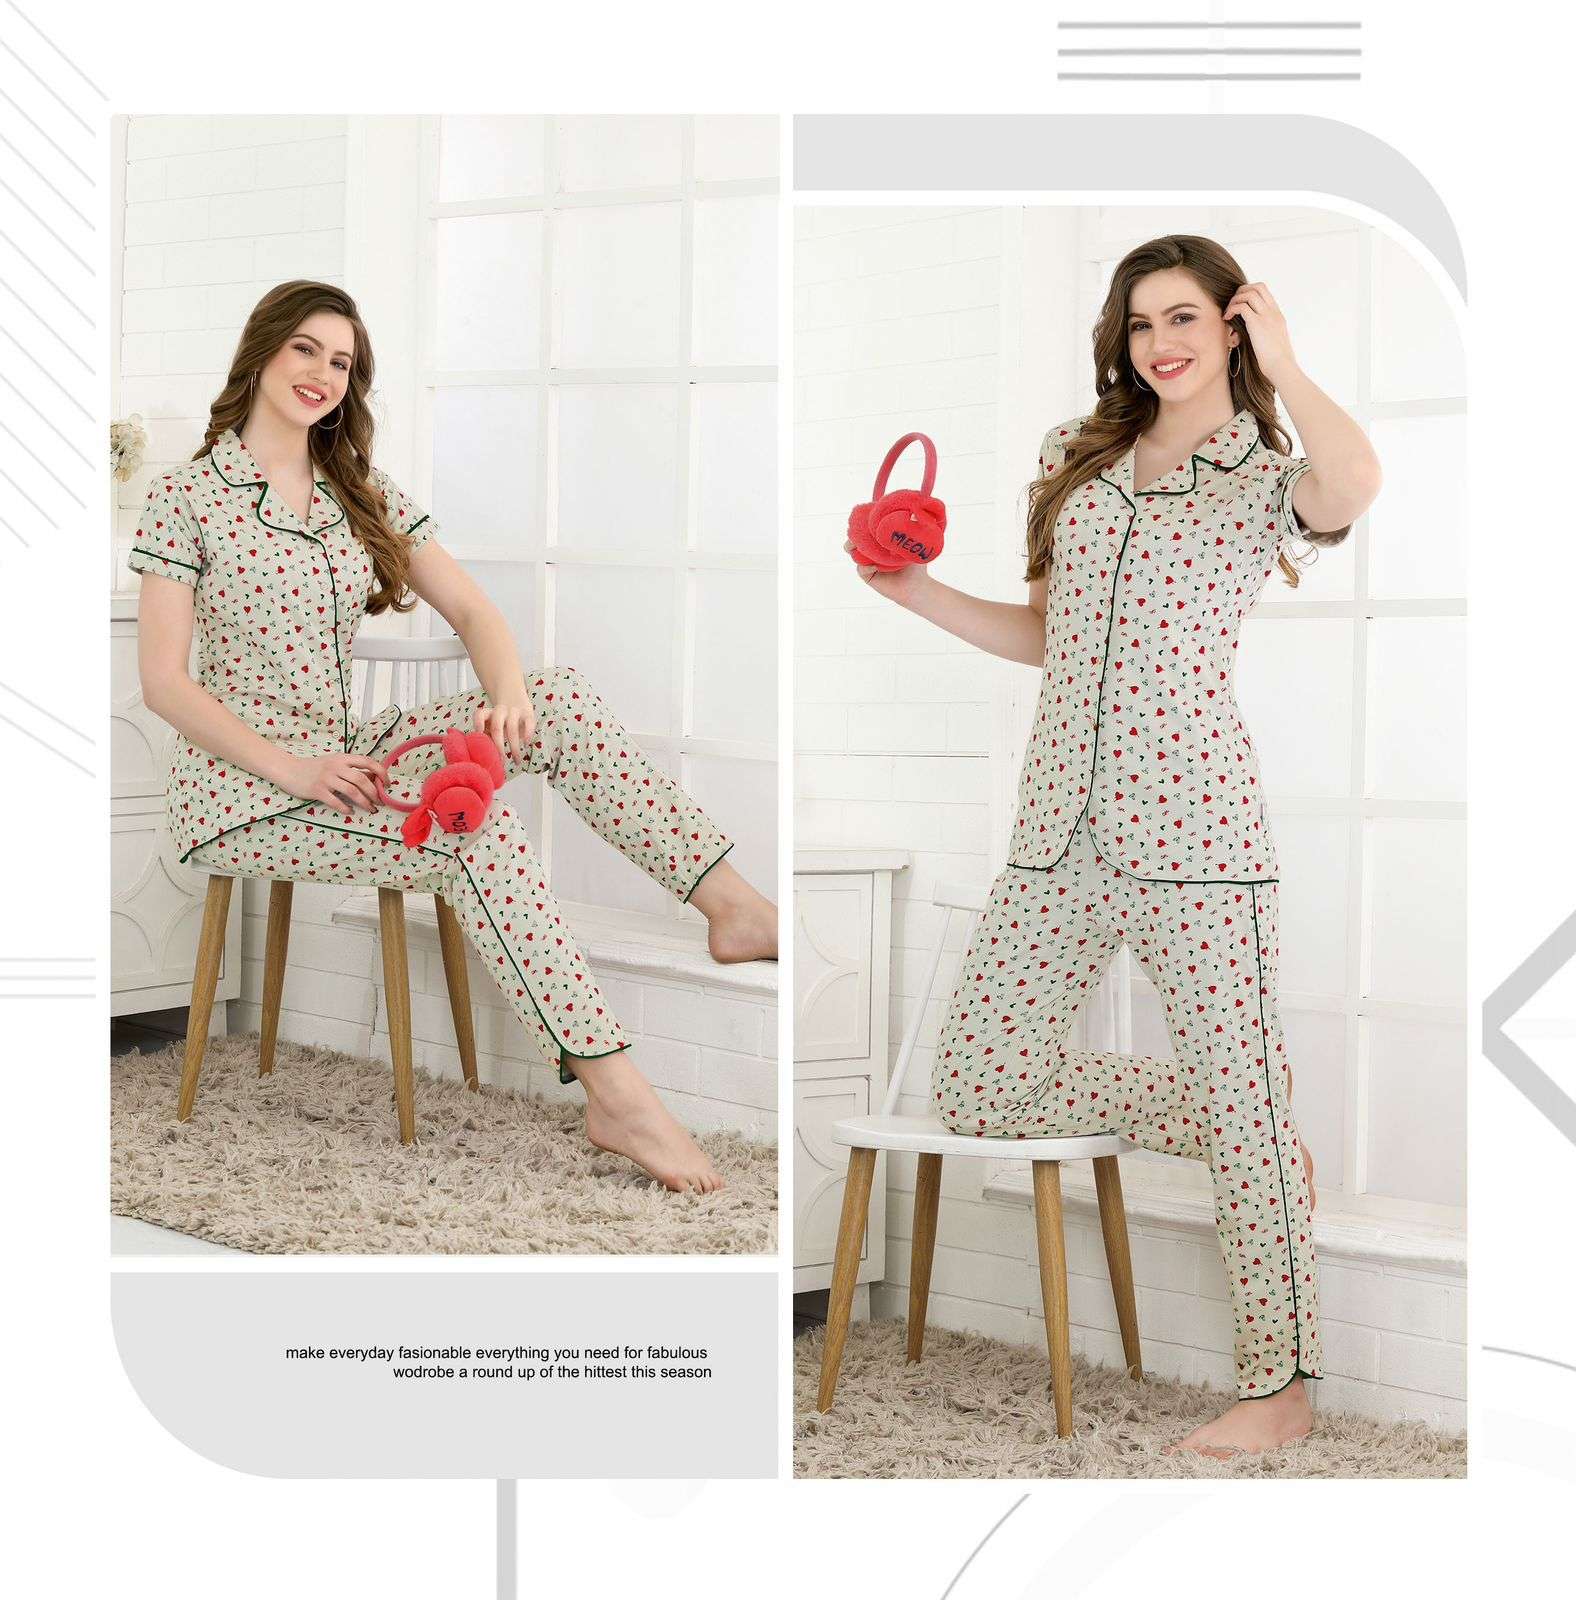 WOOGLEE Night Out Vol 3 Wholesale catalog